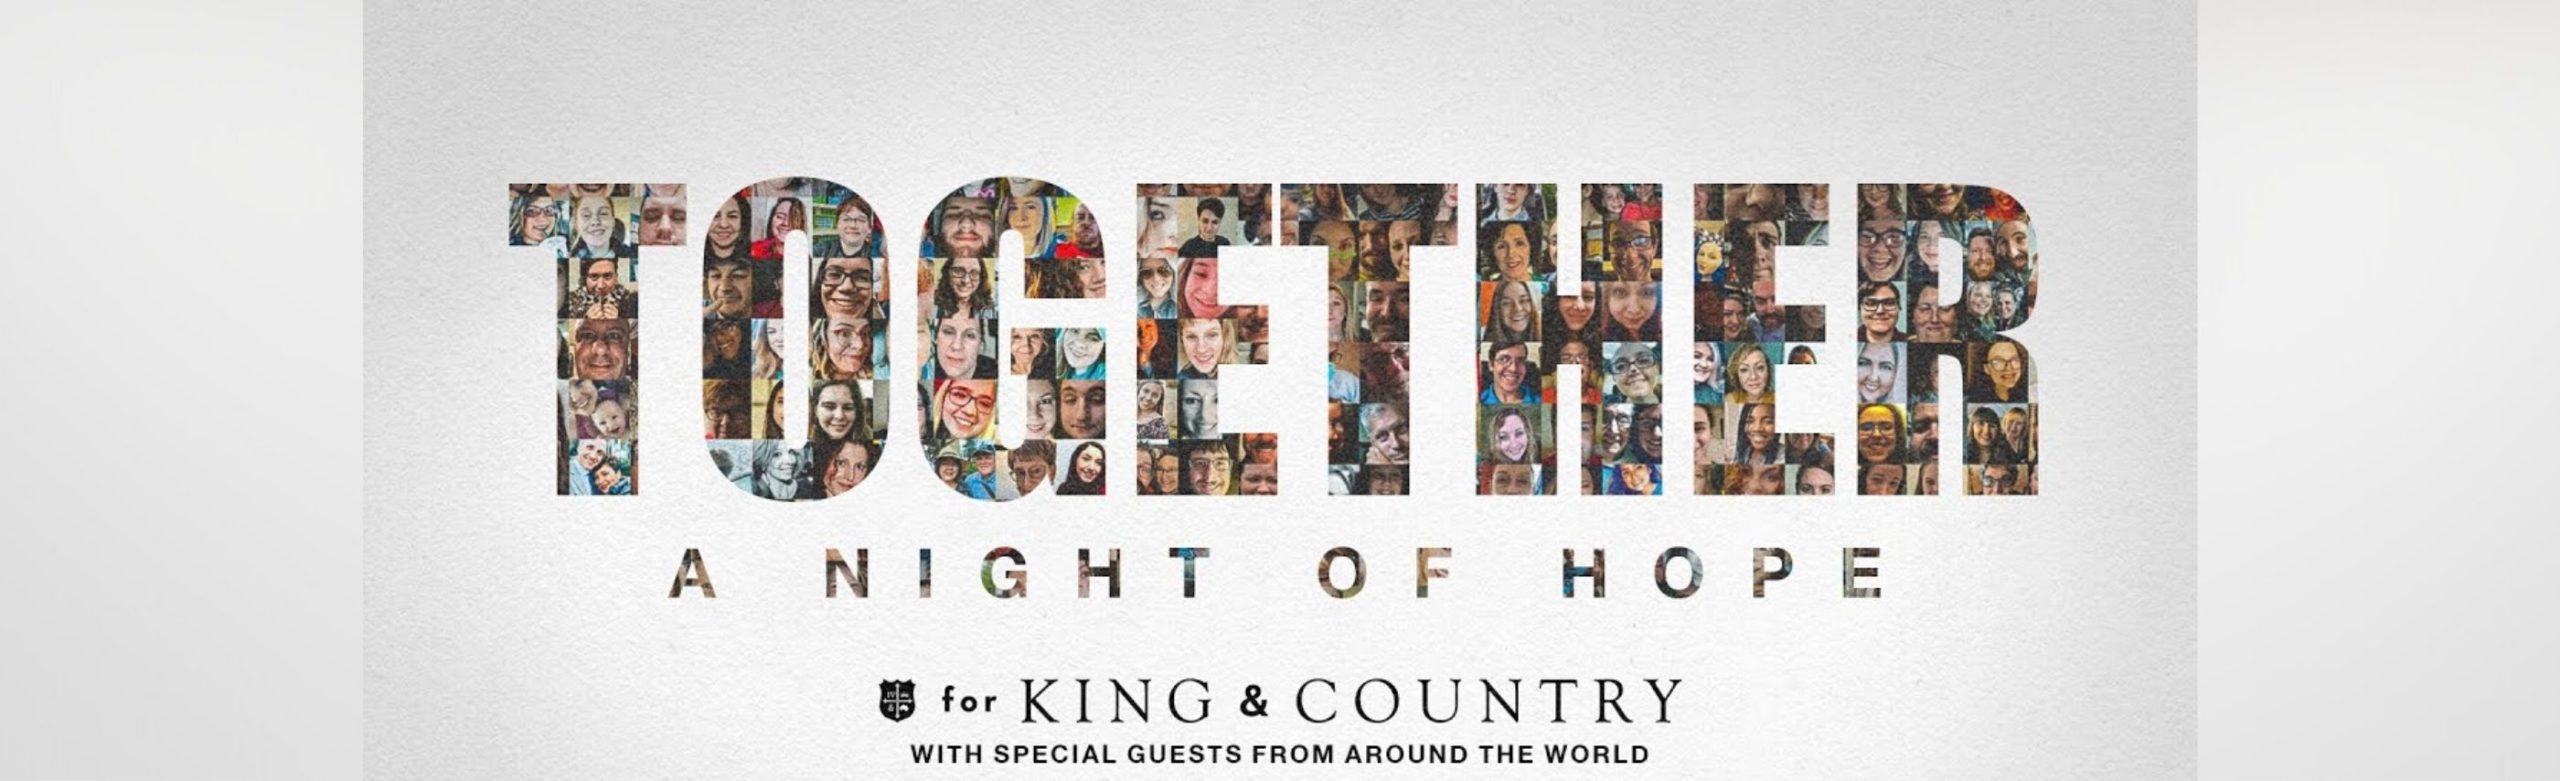 WATCH: for King & Country Announce “Together: A Night of Hope” Livestream Image